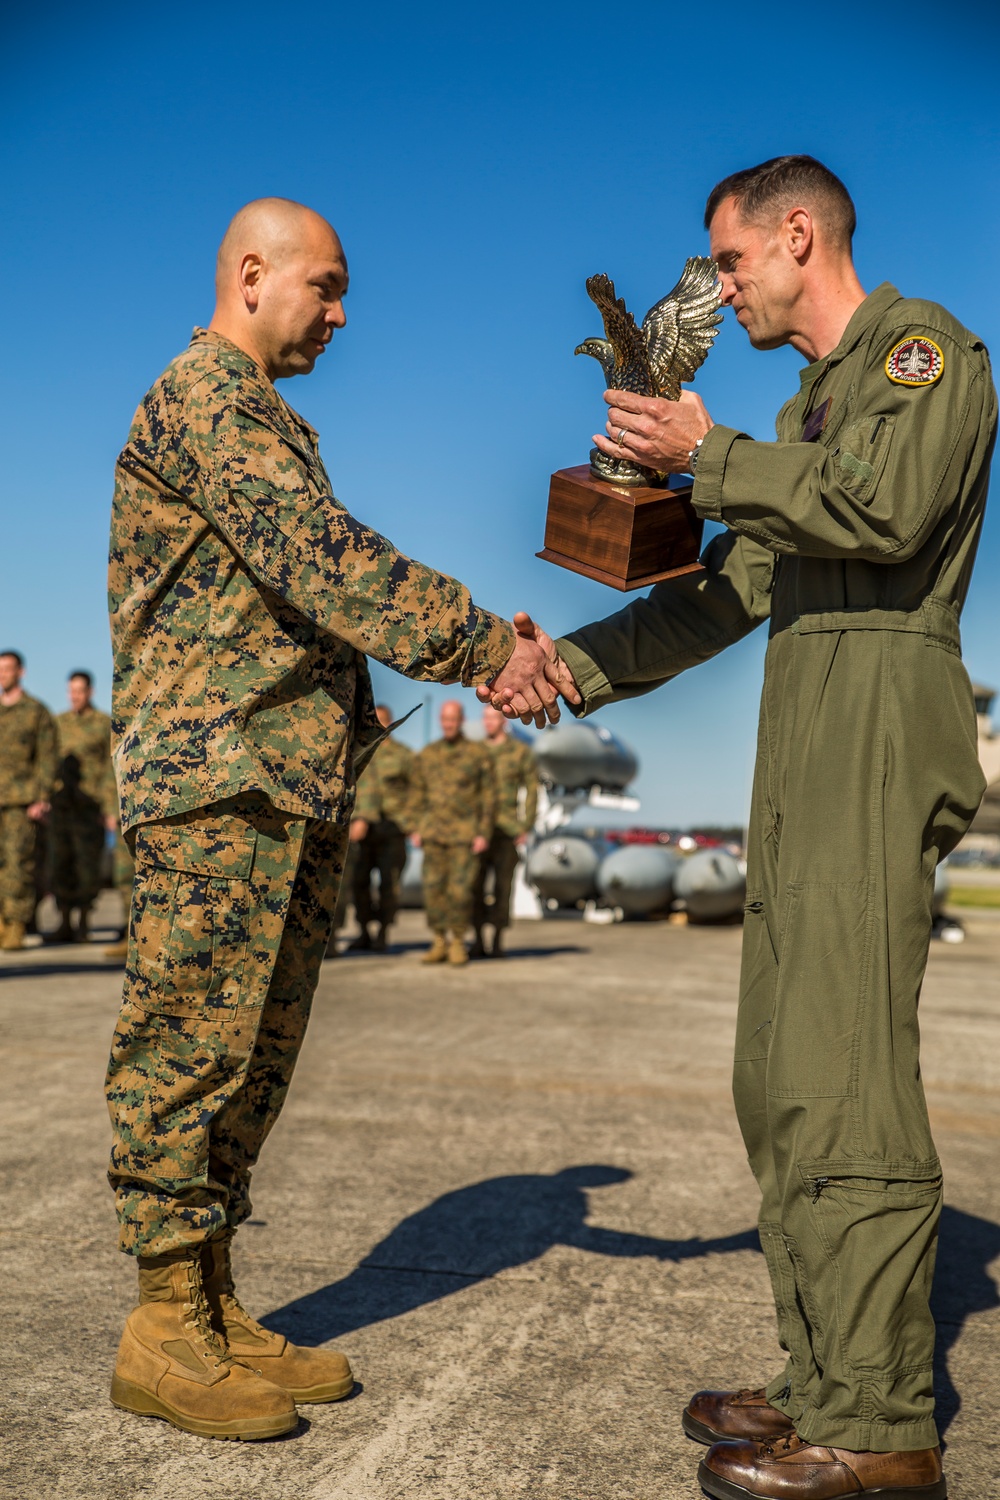 Striving for excellence: Marine awarded for leadership